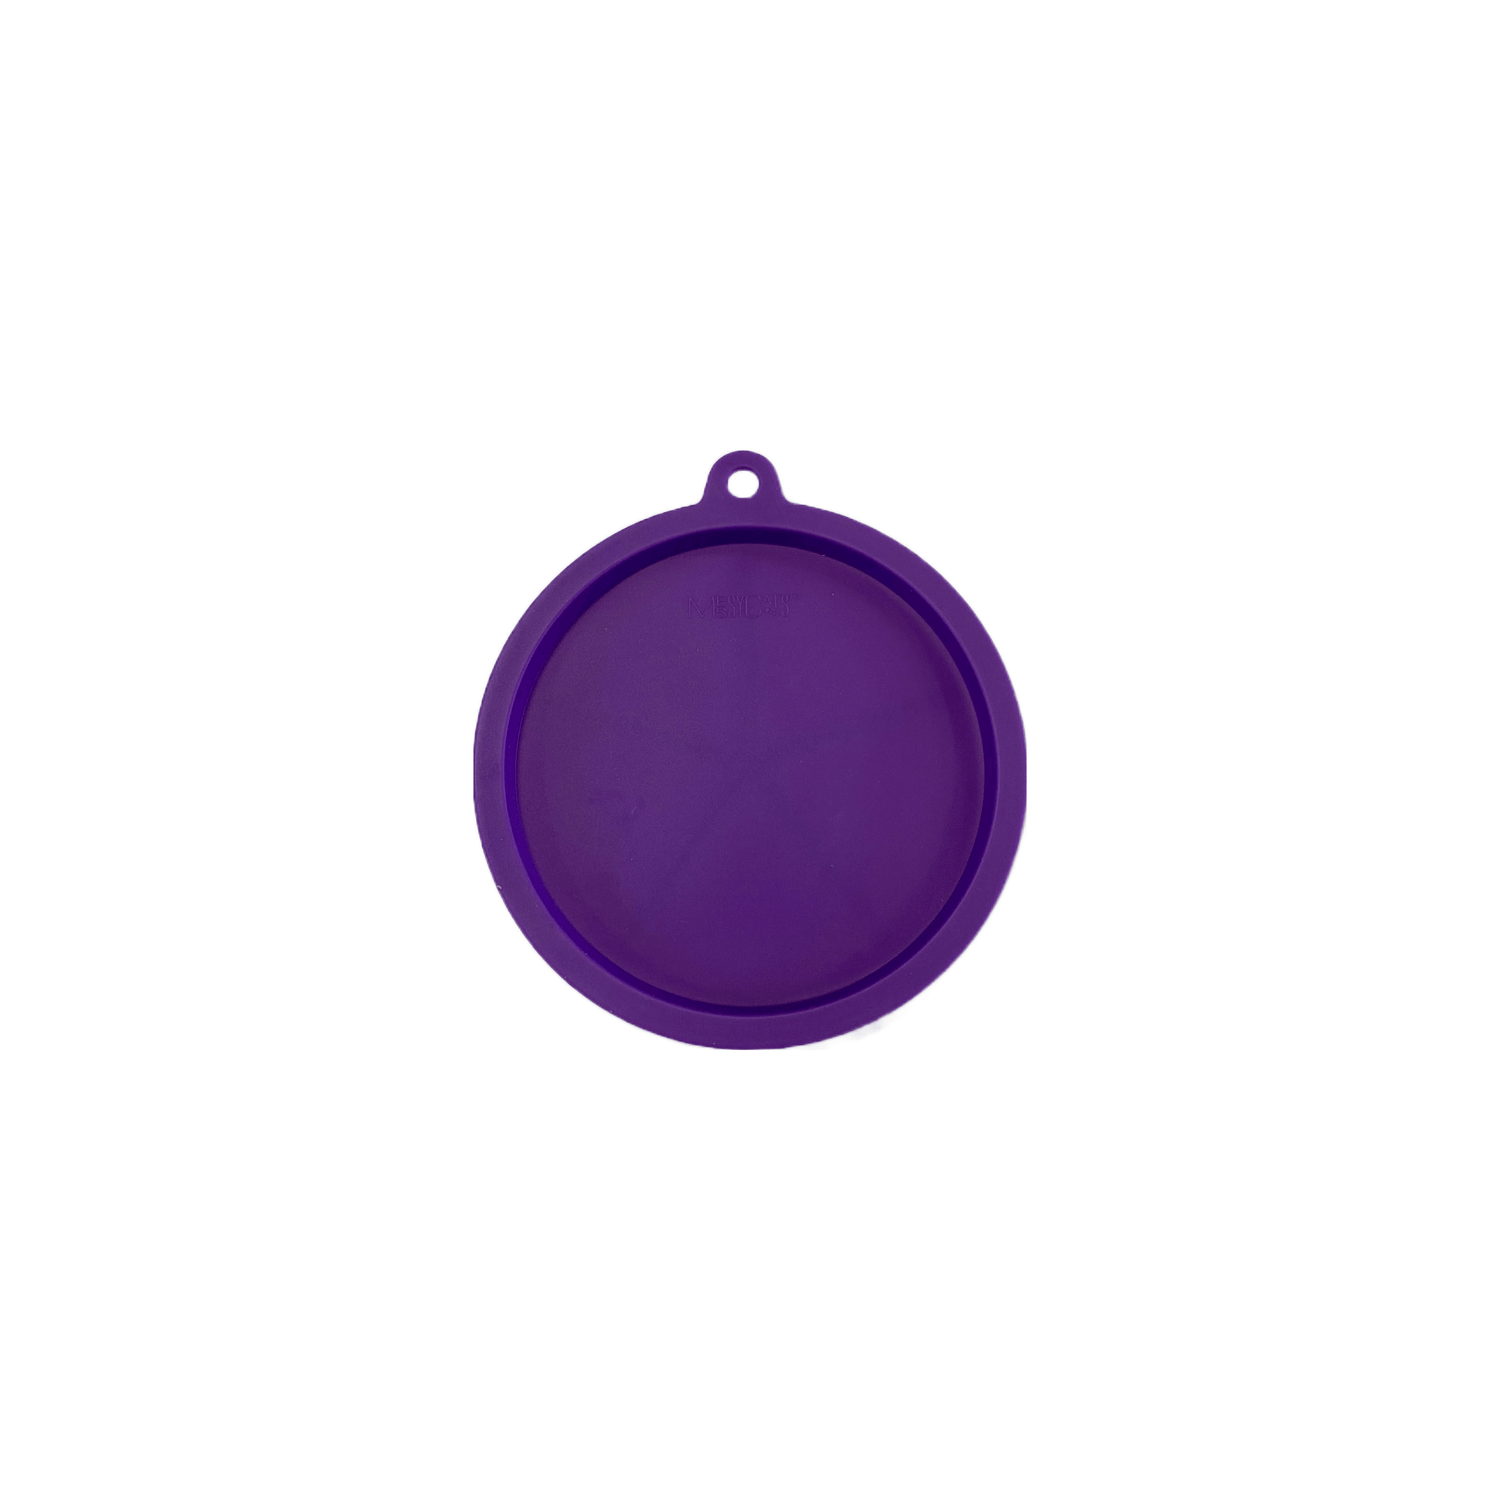 Purple cat bowl lid.  Dishwasher safe.  Great for uneaten canned or raw cat food storage. 